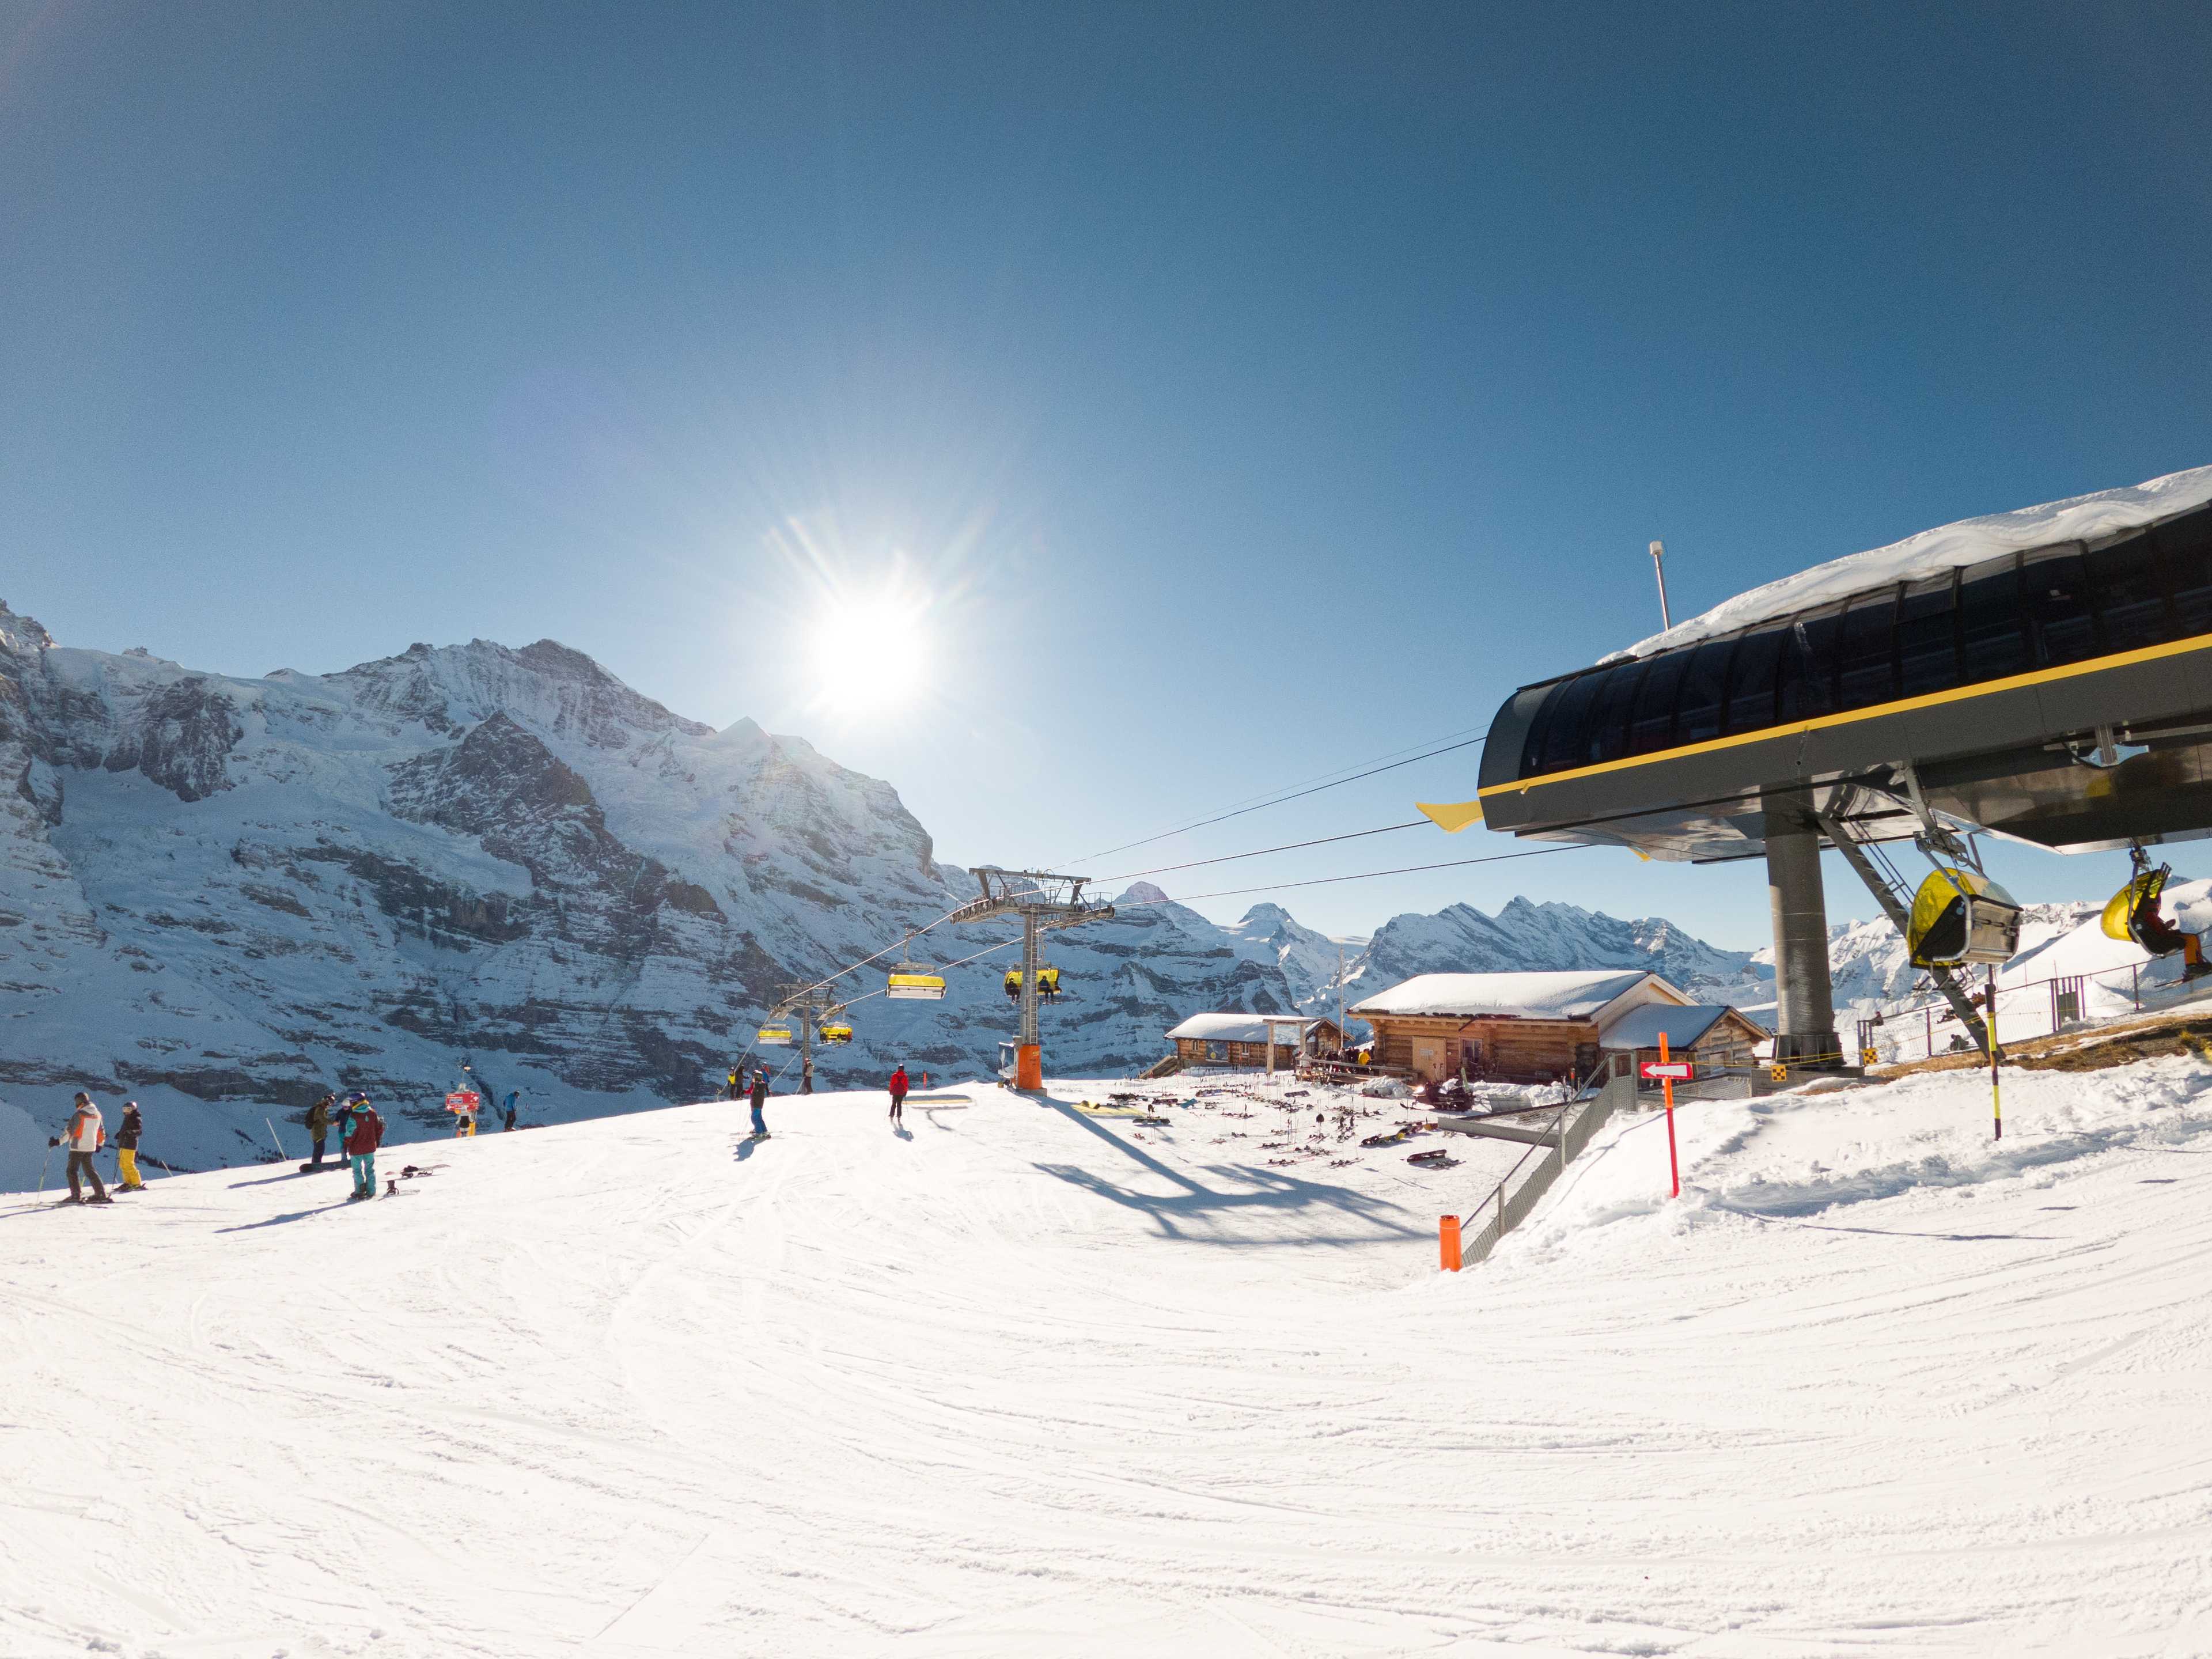 Wixi sixpack chairlift, Grindelwald, Jungfrau